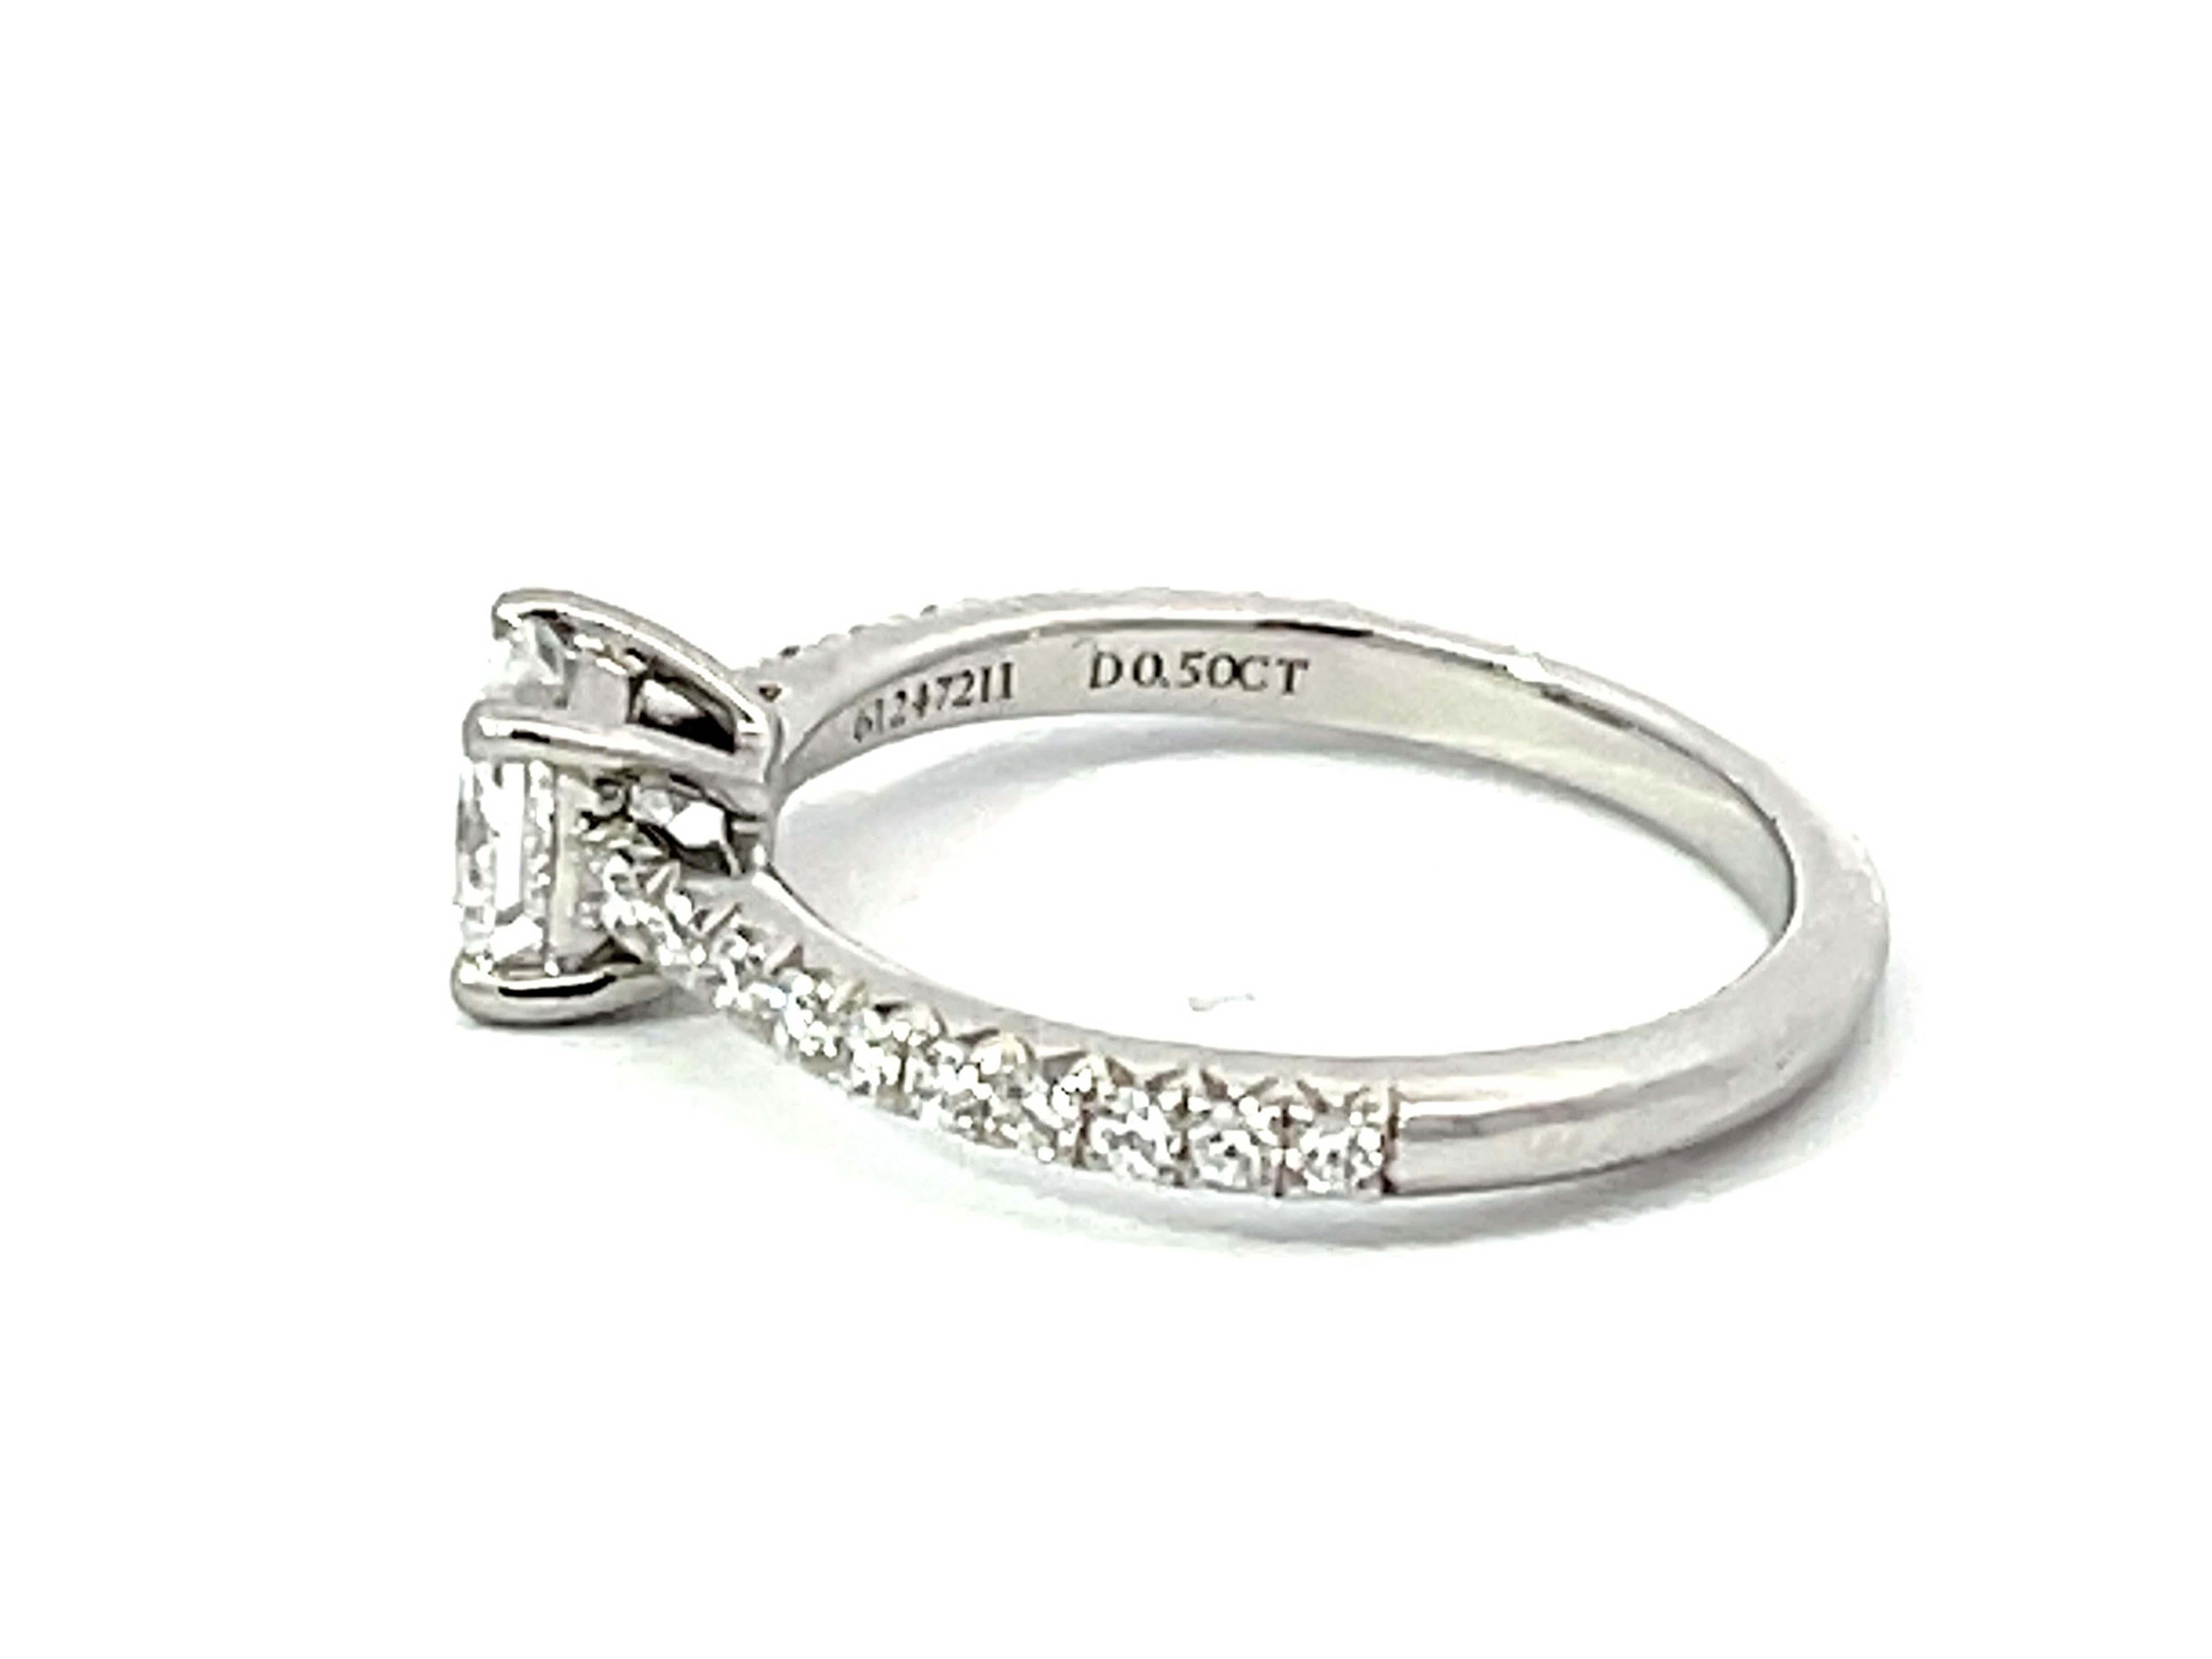 Tiffany & Co. Novo Princess Cut Engagement Ring in Platinum, G VVS1 0.51 Ct In Excellent Condition For Sale In Honolulu, HI